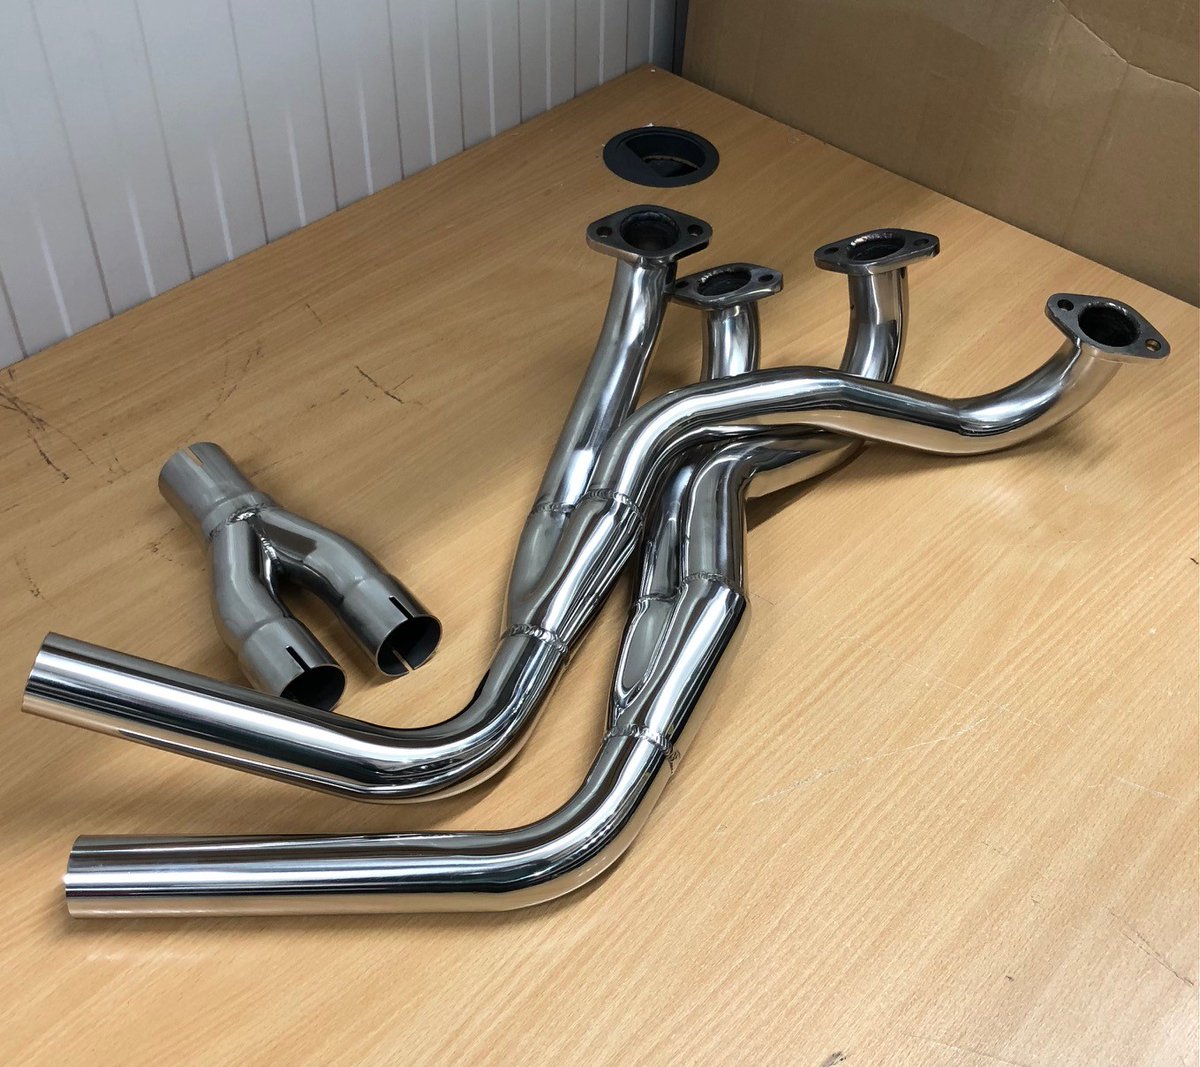 Preparing to send out a polished steel, large bore manifold for an Elan to another happy returning customer. parts.classicteamlotus.co.uk #elan #lotuscars #classiclotus